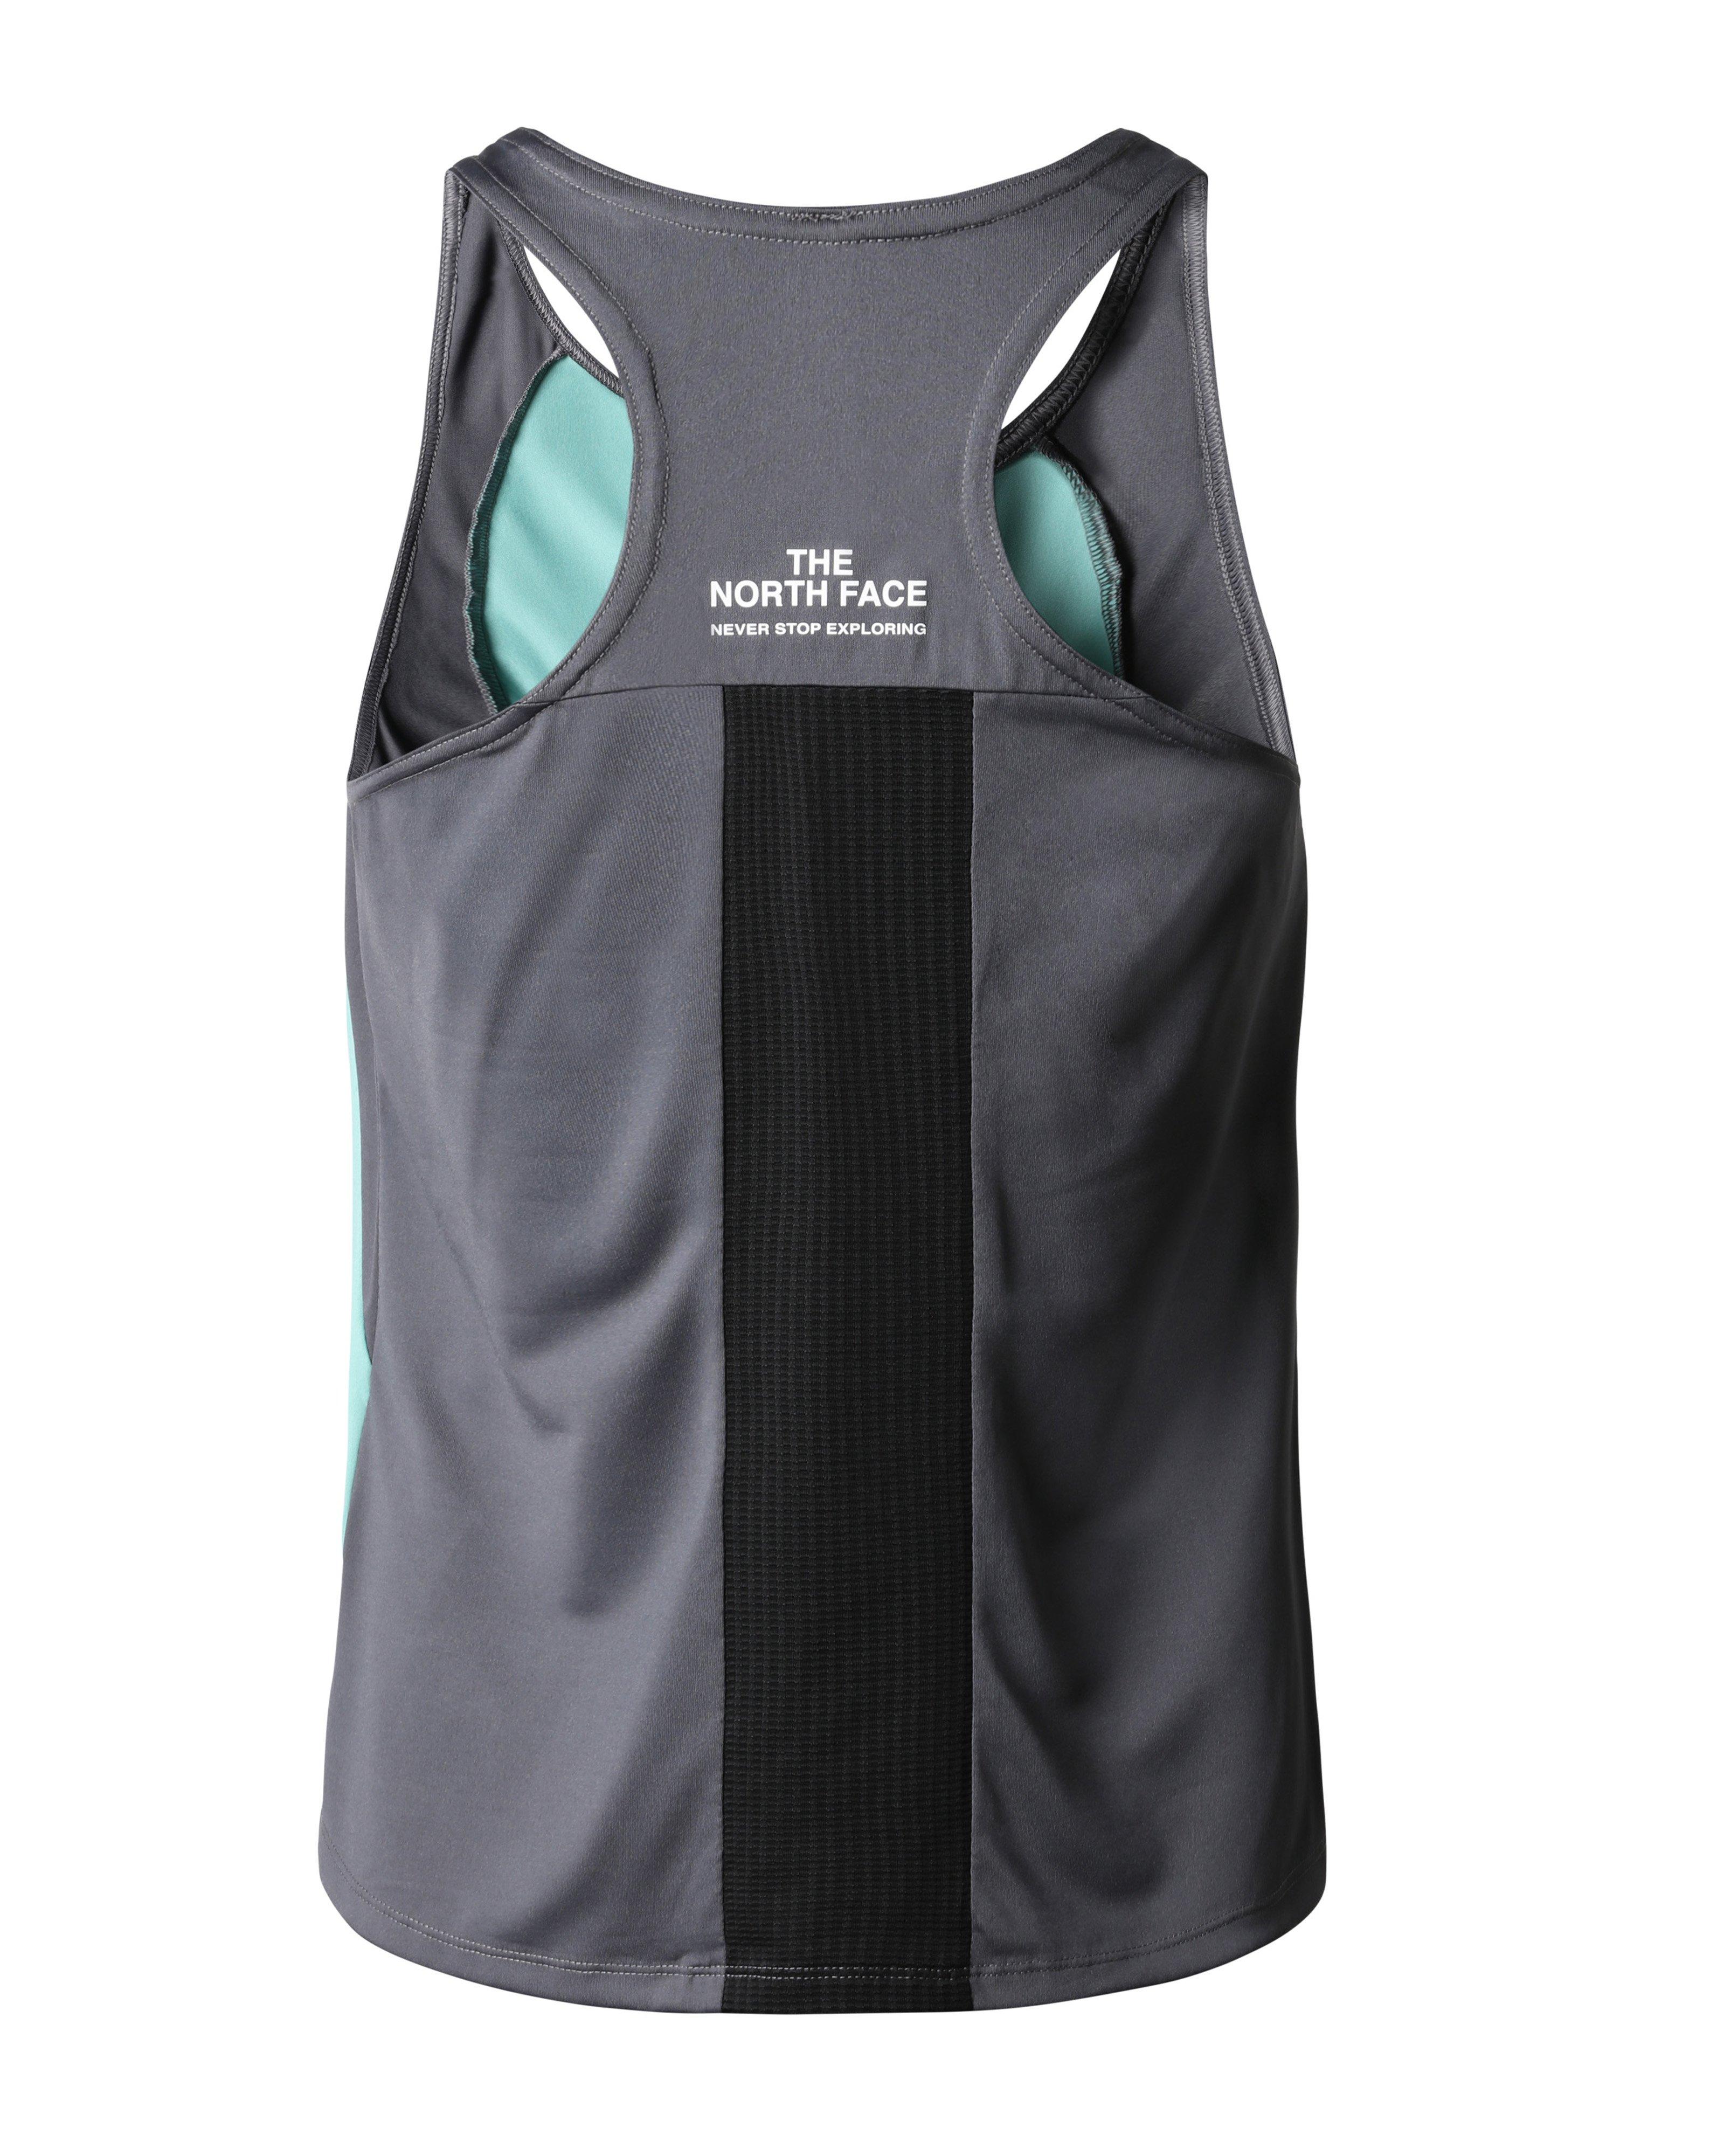 The North Face Women’s MA Tank Top -  Blue